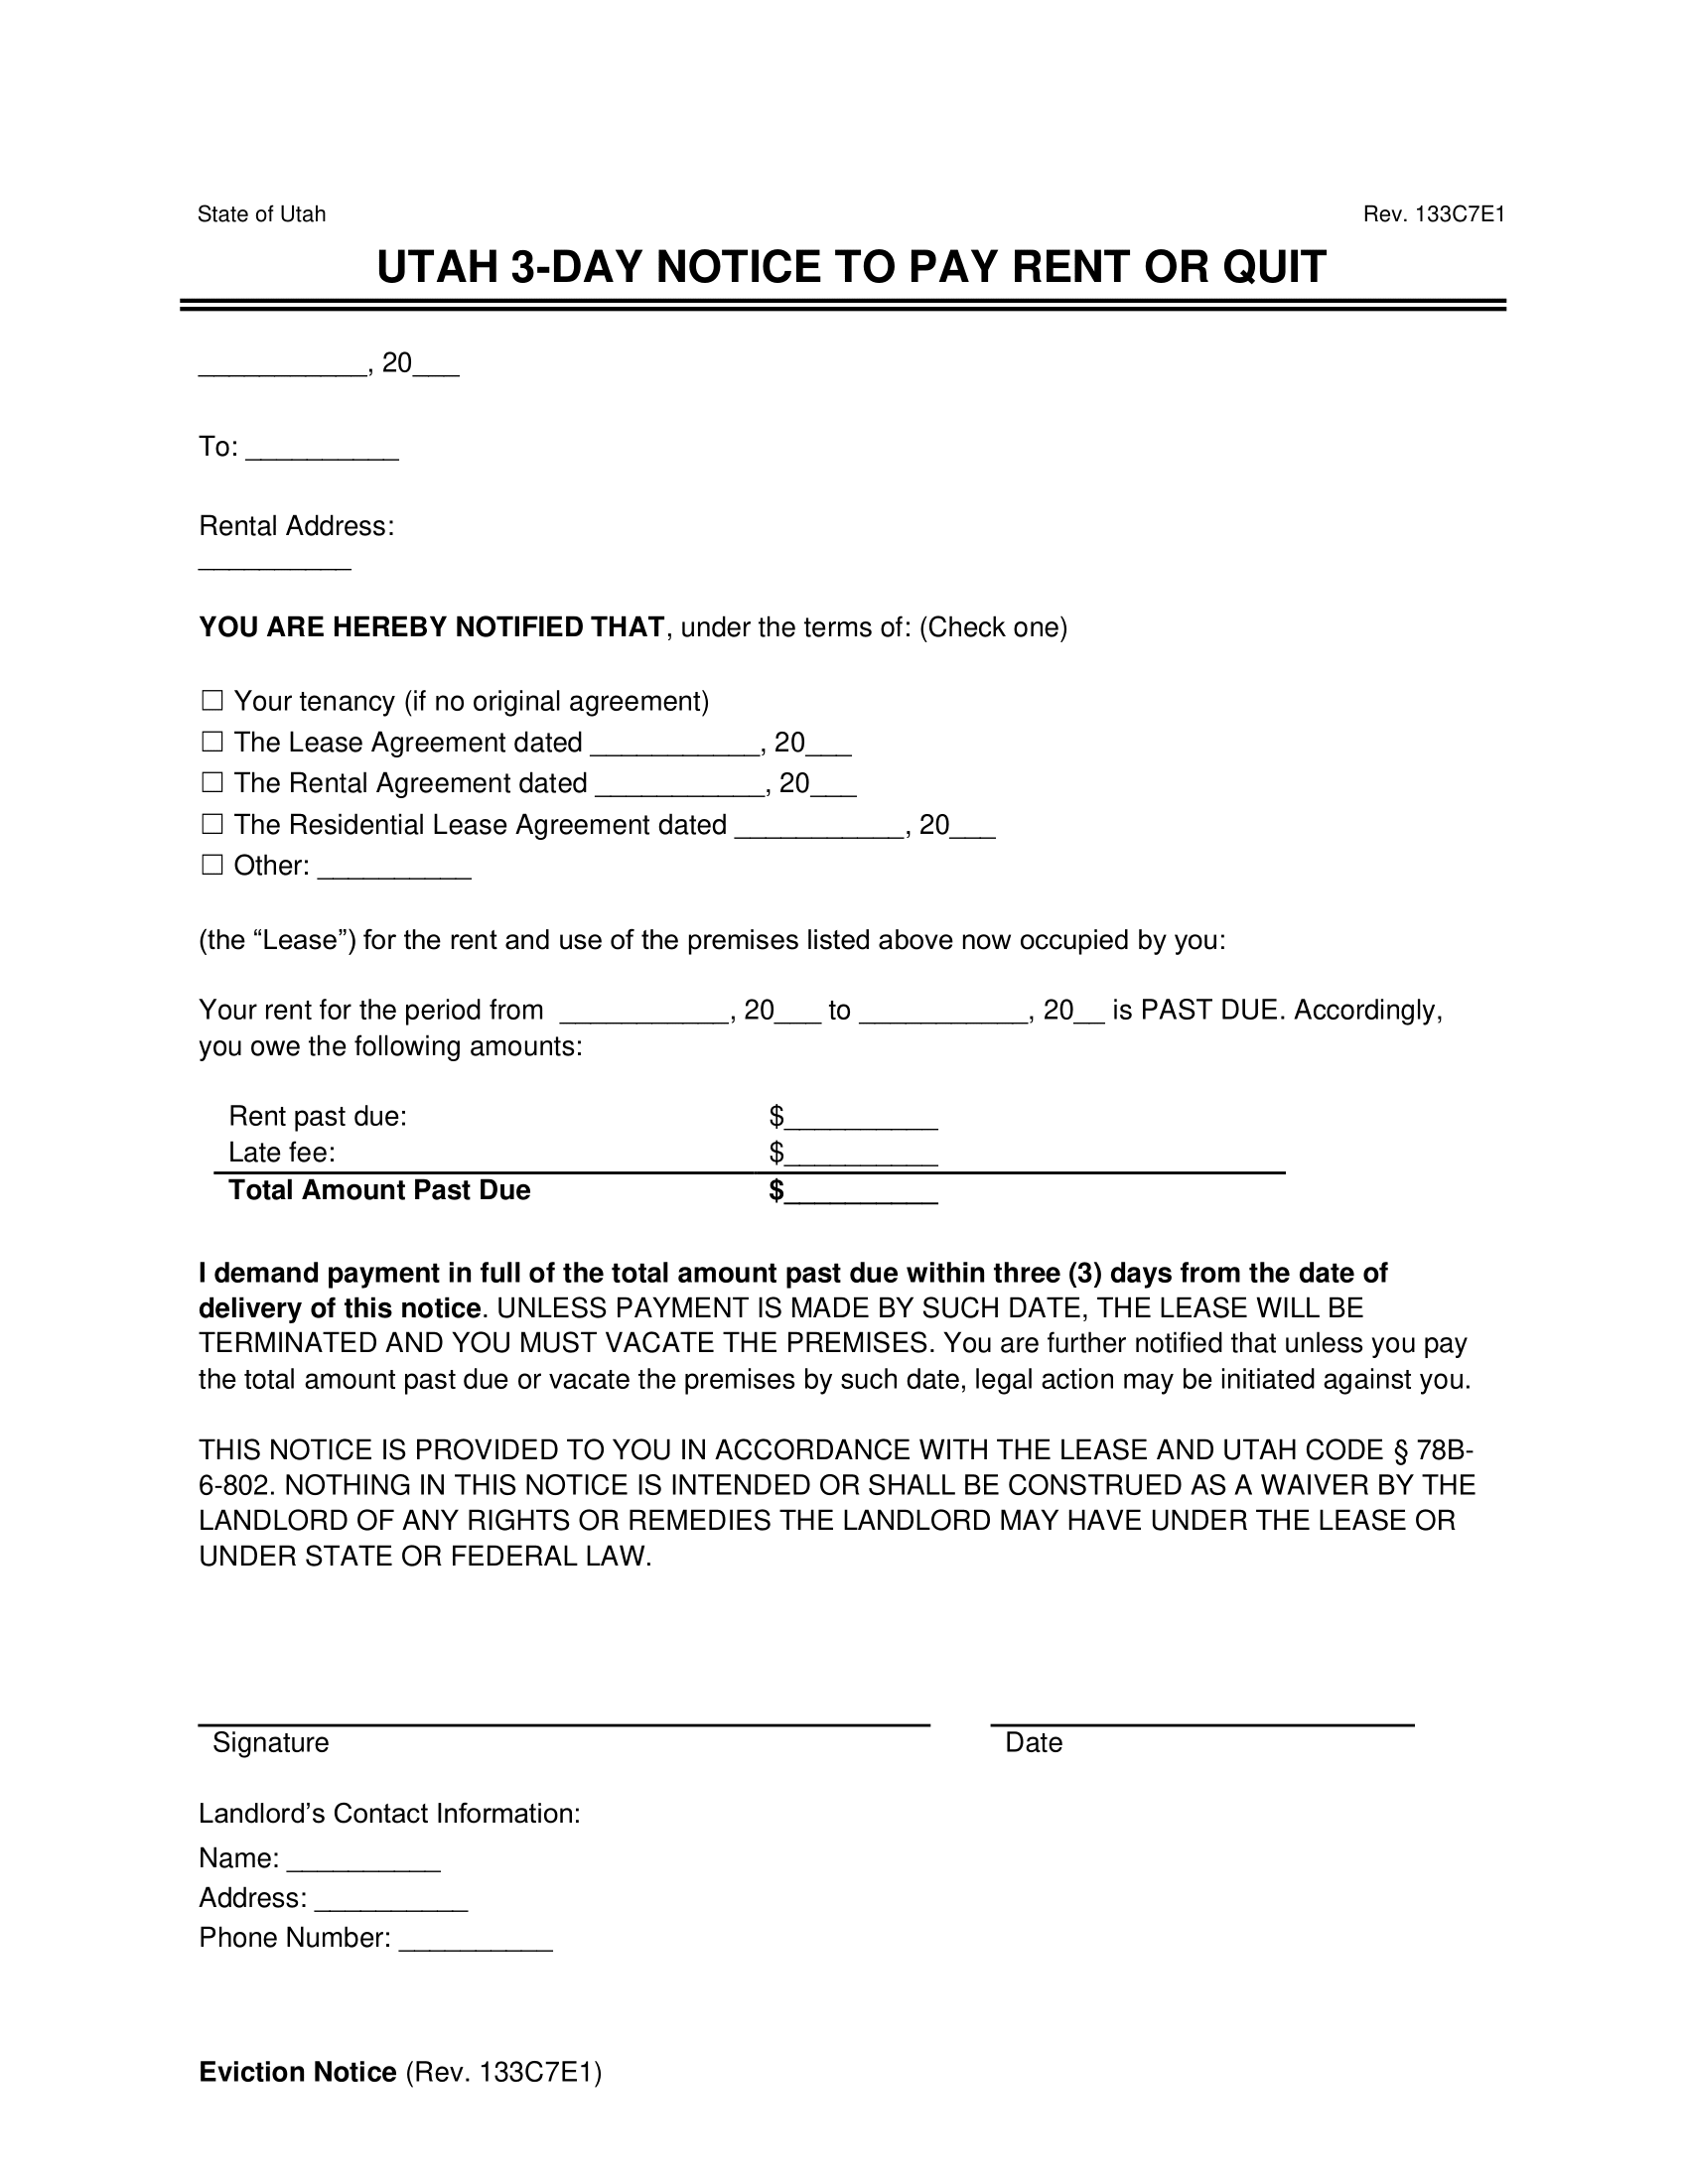 Utah 3-Day Eviction Notice to Quit (Non-Payment of Rent)